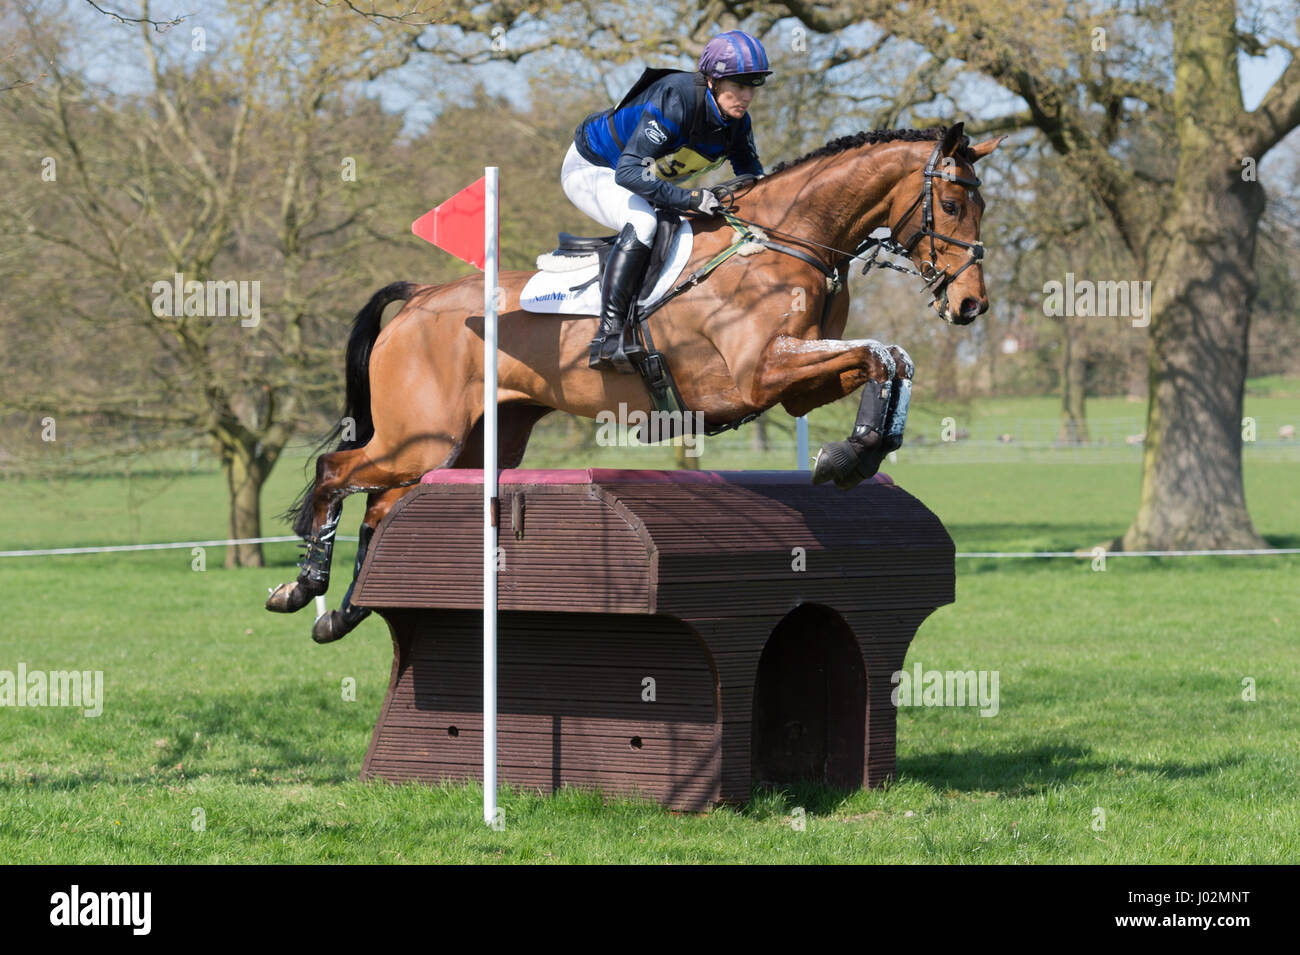 Weston Under Lizard, Shifnal, UK. 09th Apr, 2017. The Weston Park Horse Trials, Weston Park, Shiffnal, Zara Tindall and her horse High Kingdom take part in the cross country phase of the Advanced Class which they went on to win. The object of the Cross Country test is to prove the speed, endurance and jumping ability of the horse . At the same time, it demonstrates the rider's knowledge of pace and the use of this horse across country. Credit: Trevor Holt/Alamy Live News Stock Photo